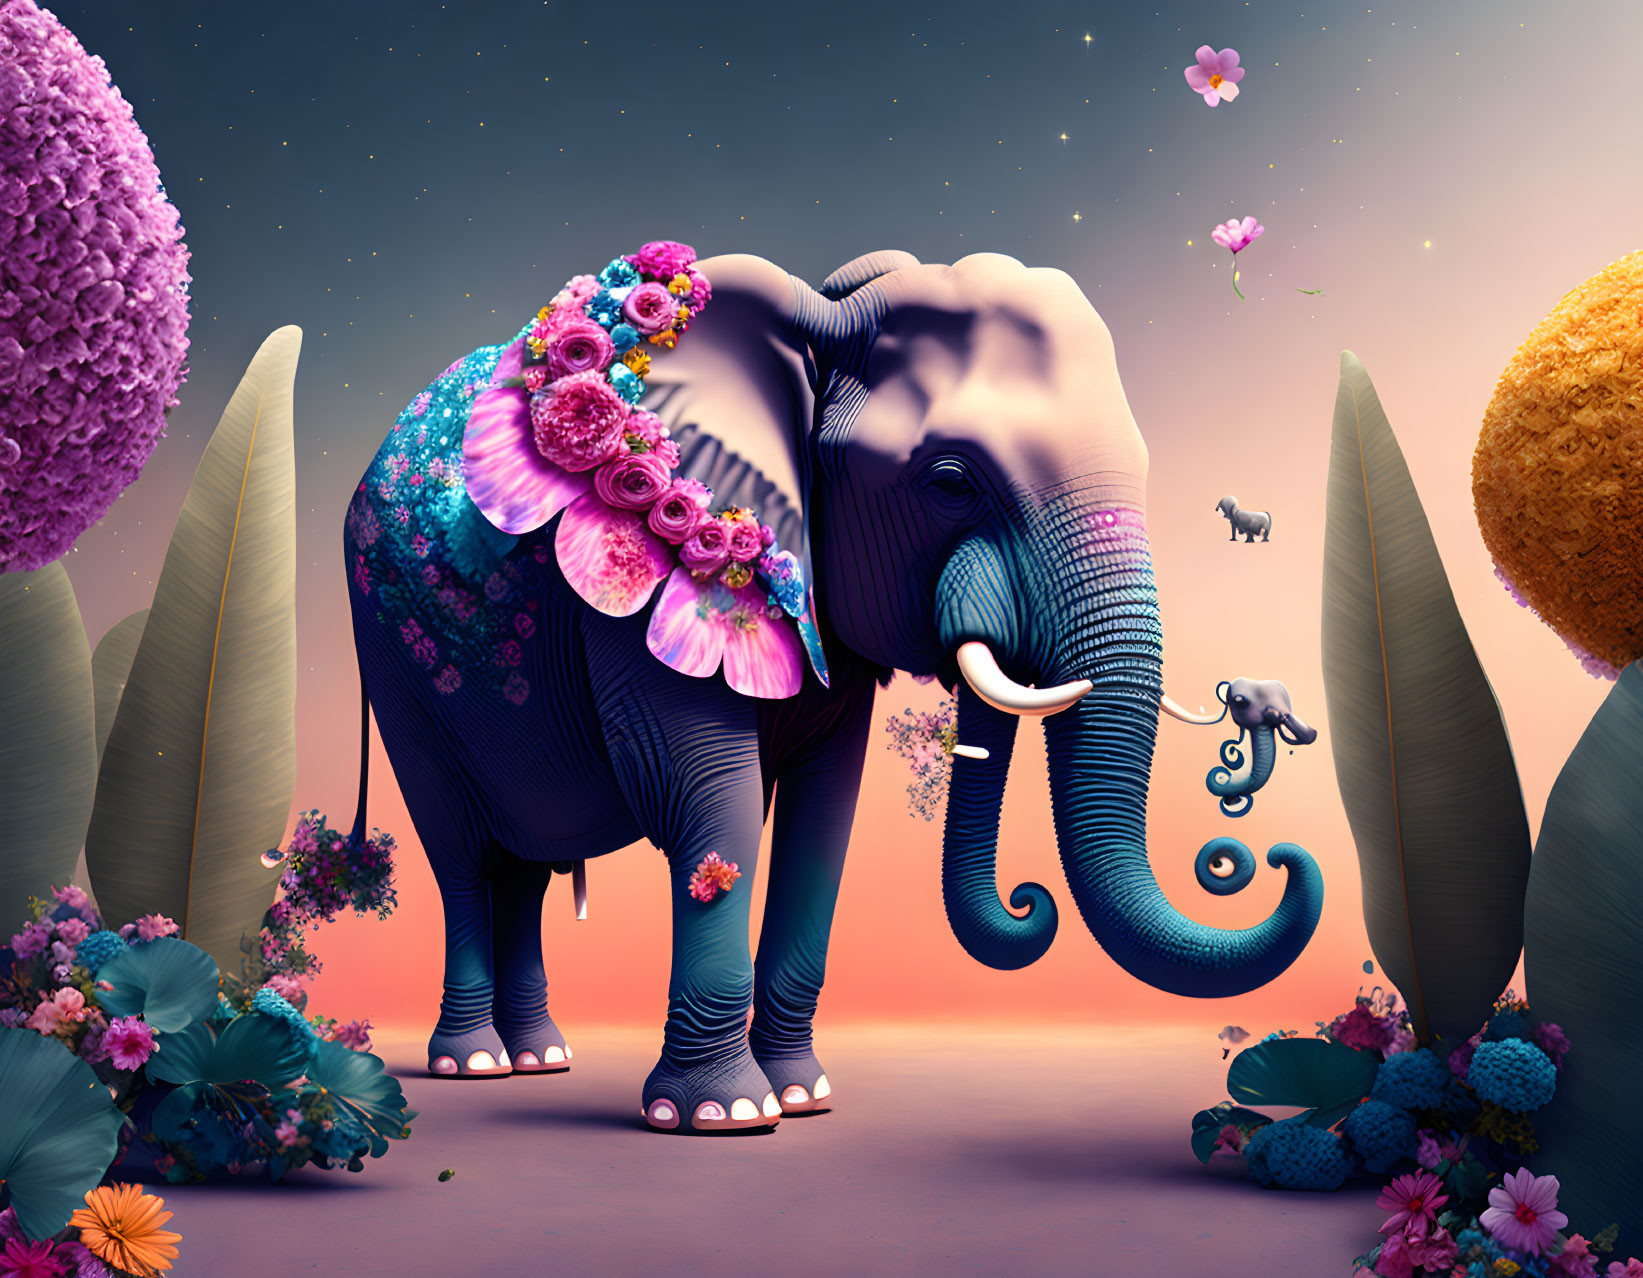 Colorful Fantasy Landscape with Decorated Elephant and Butterflies